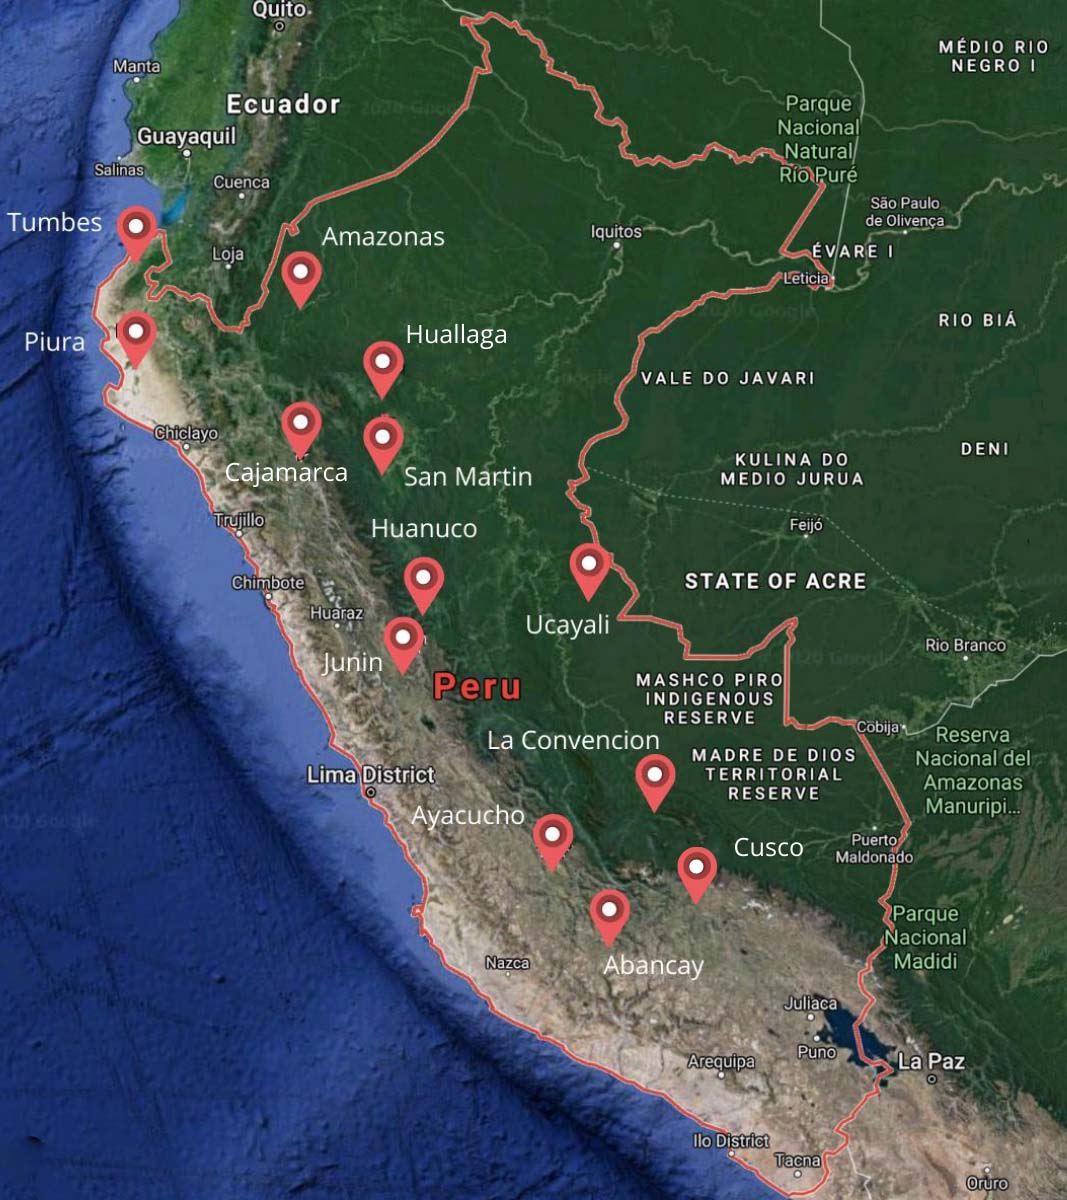 Map with markers for the areas cacao plants grow in Peru, including the coast, Amazon, and Andes.